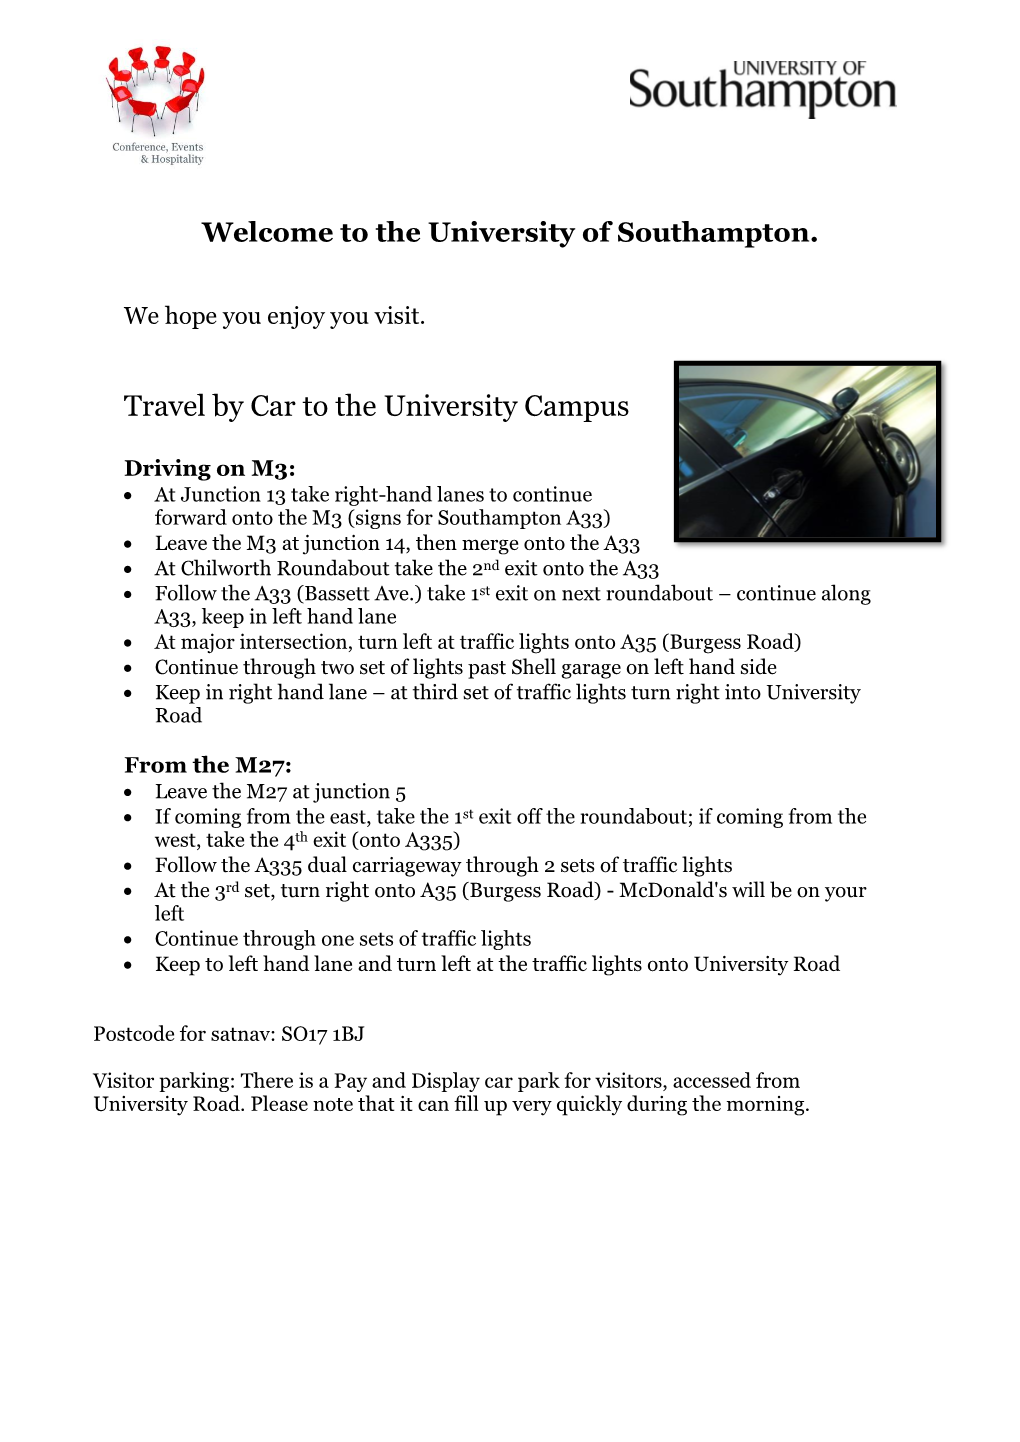 Travel by Car to the University Campus